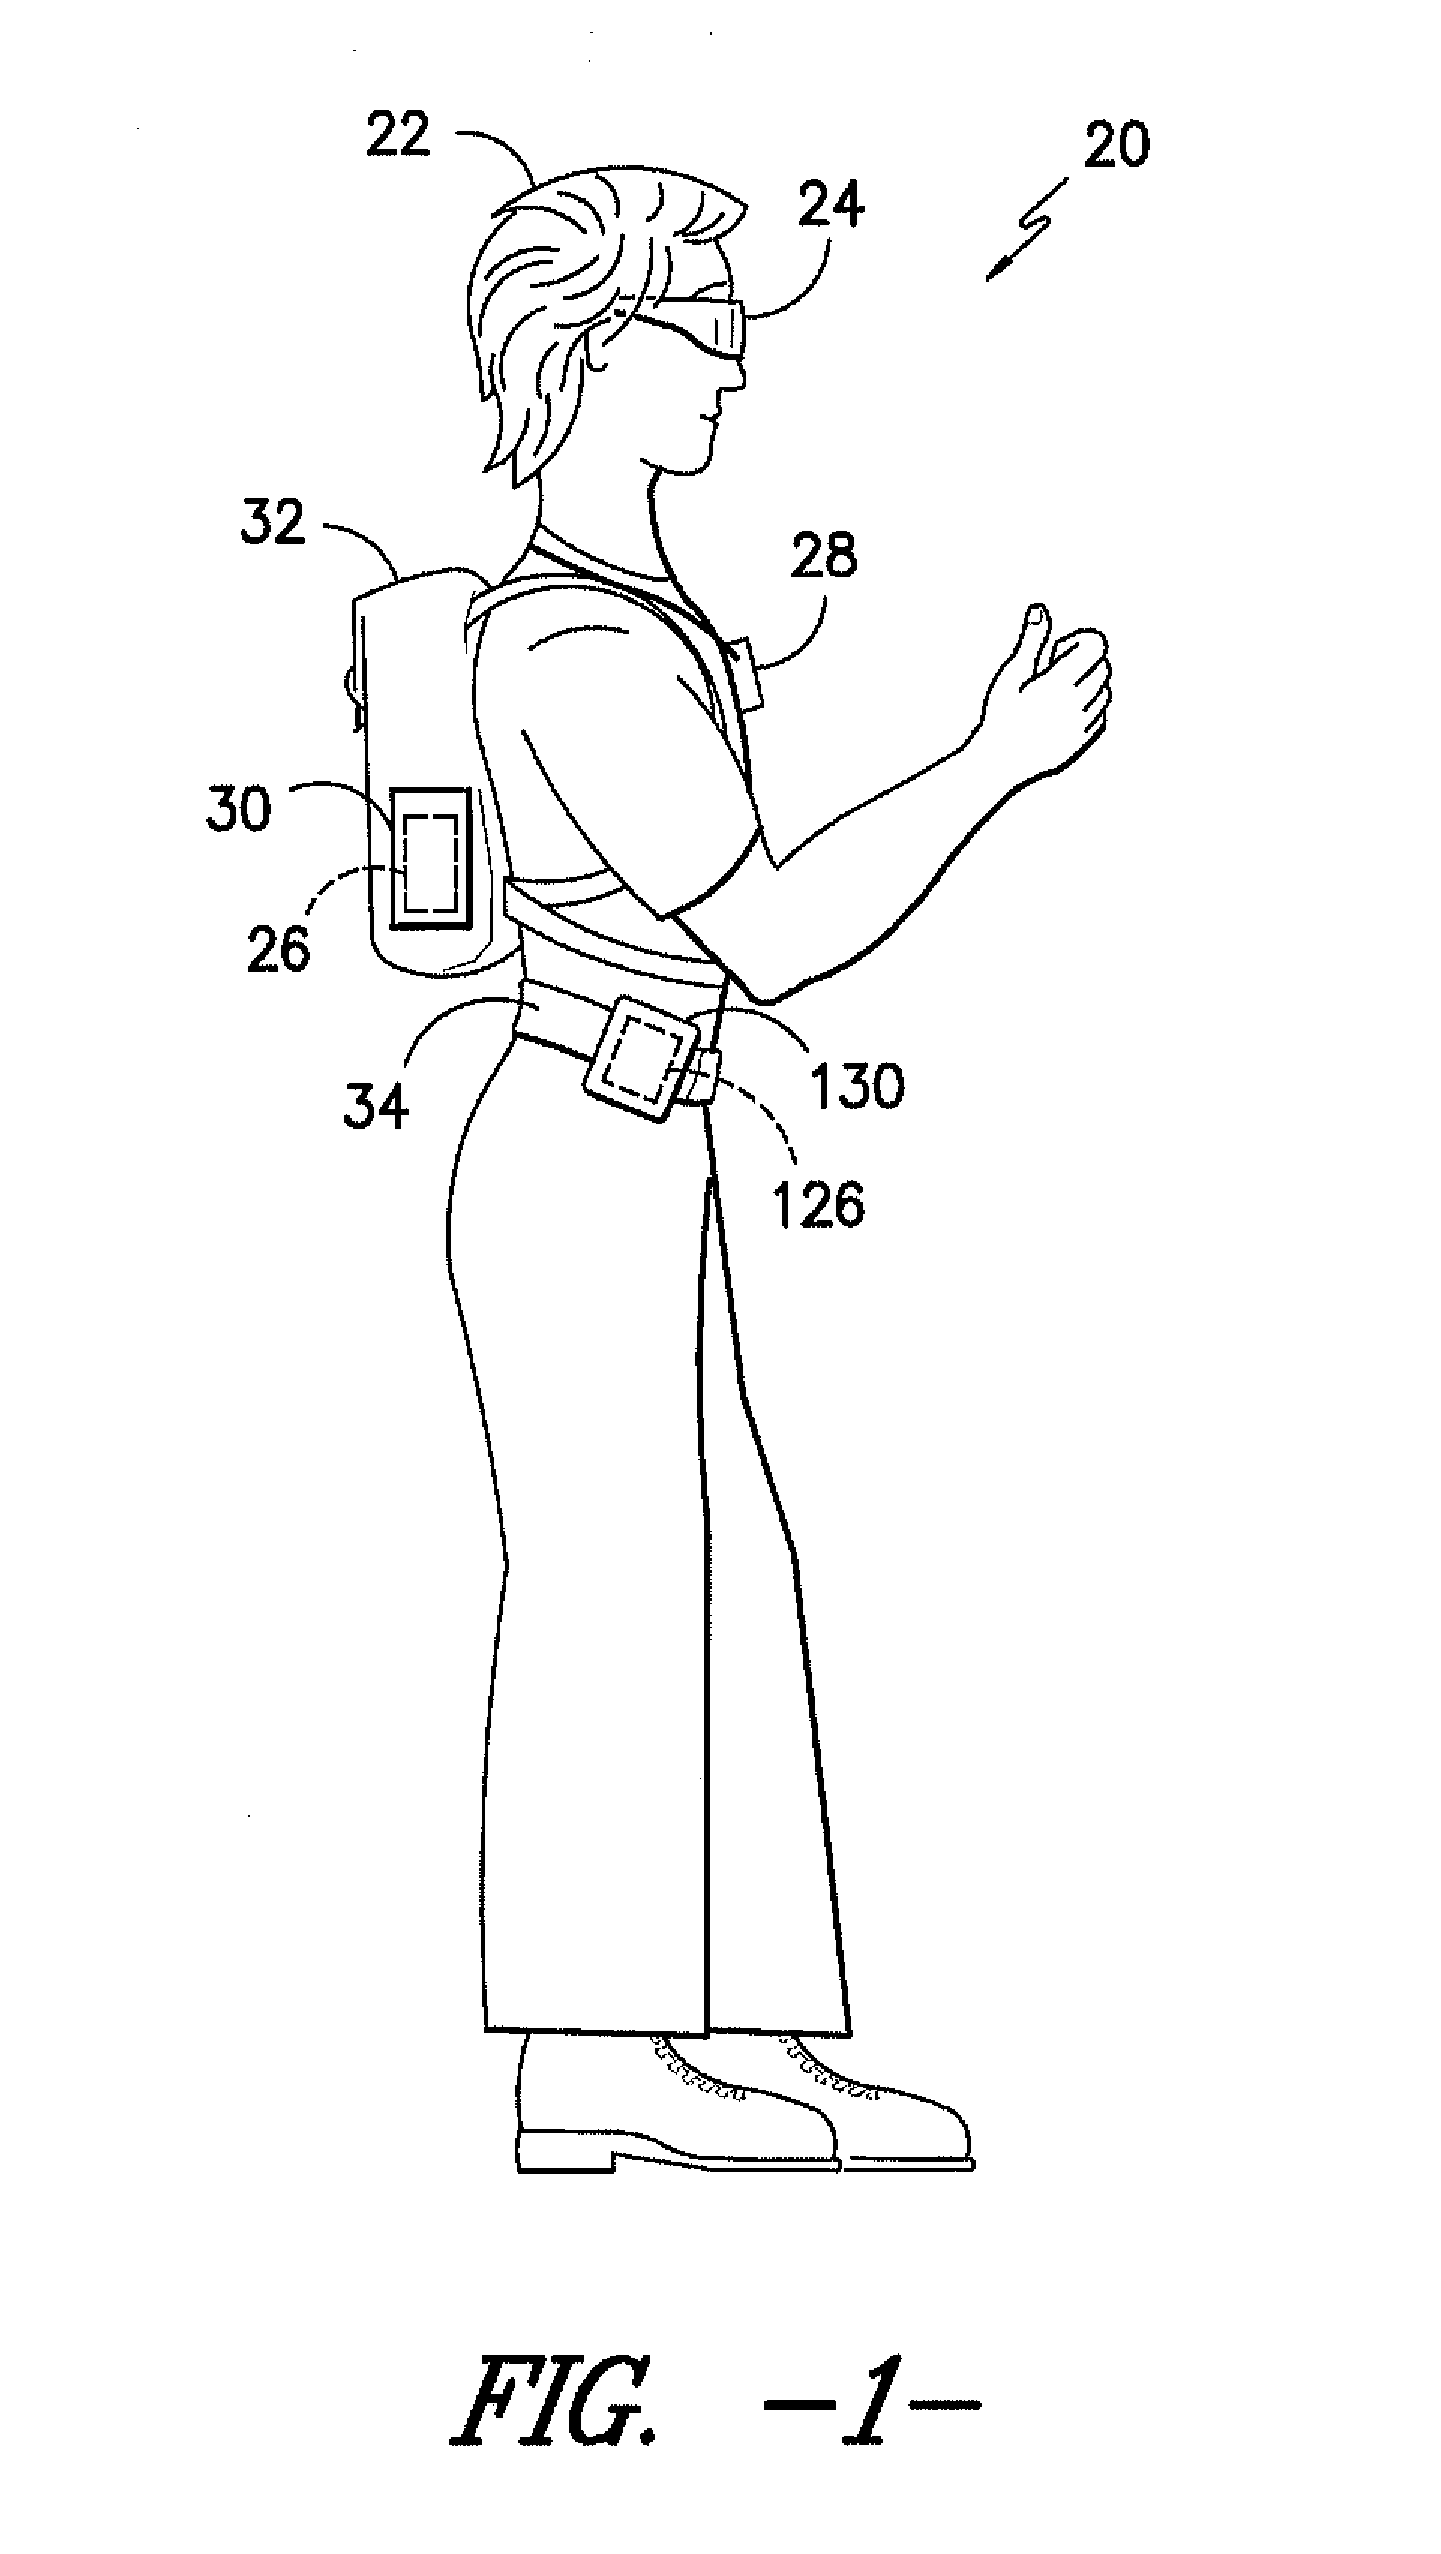 Speech generation device with a head mounted display unit